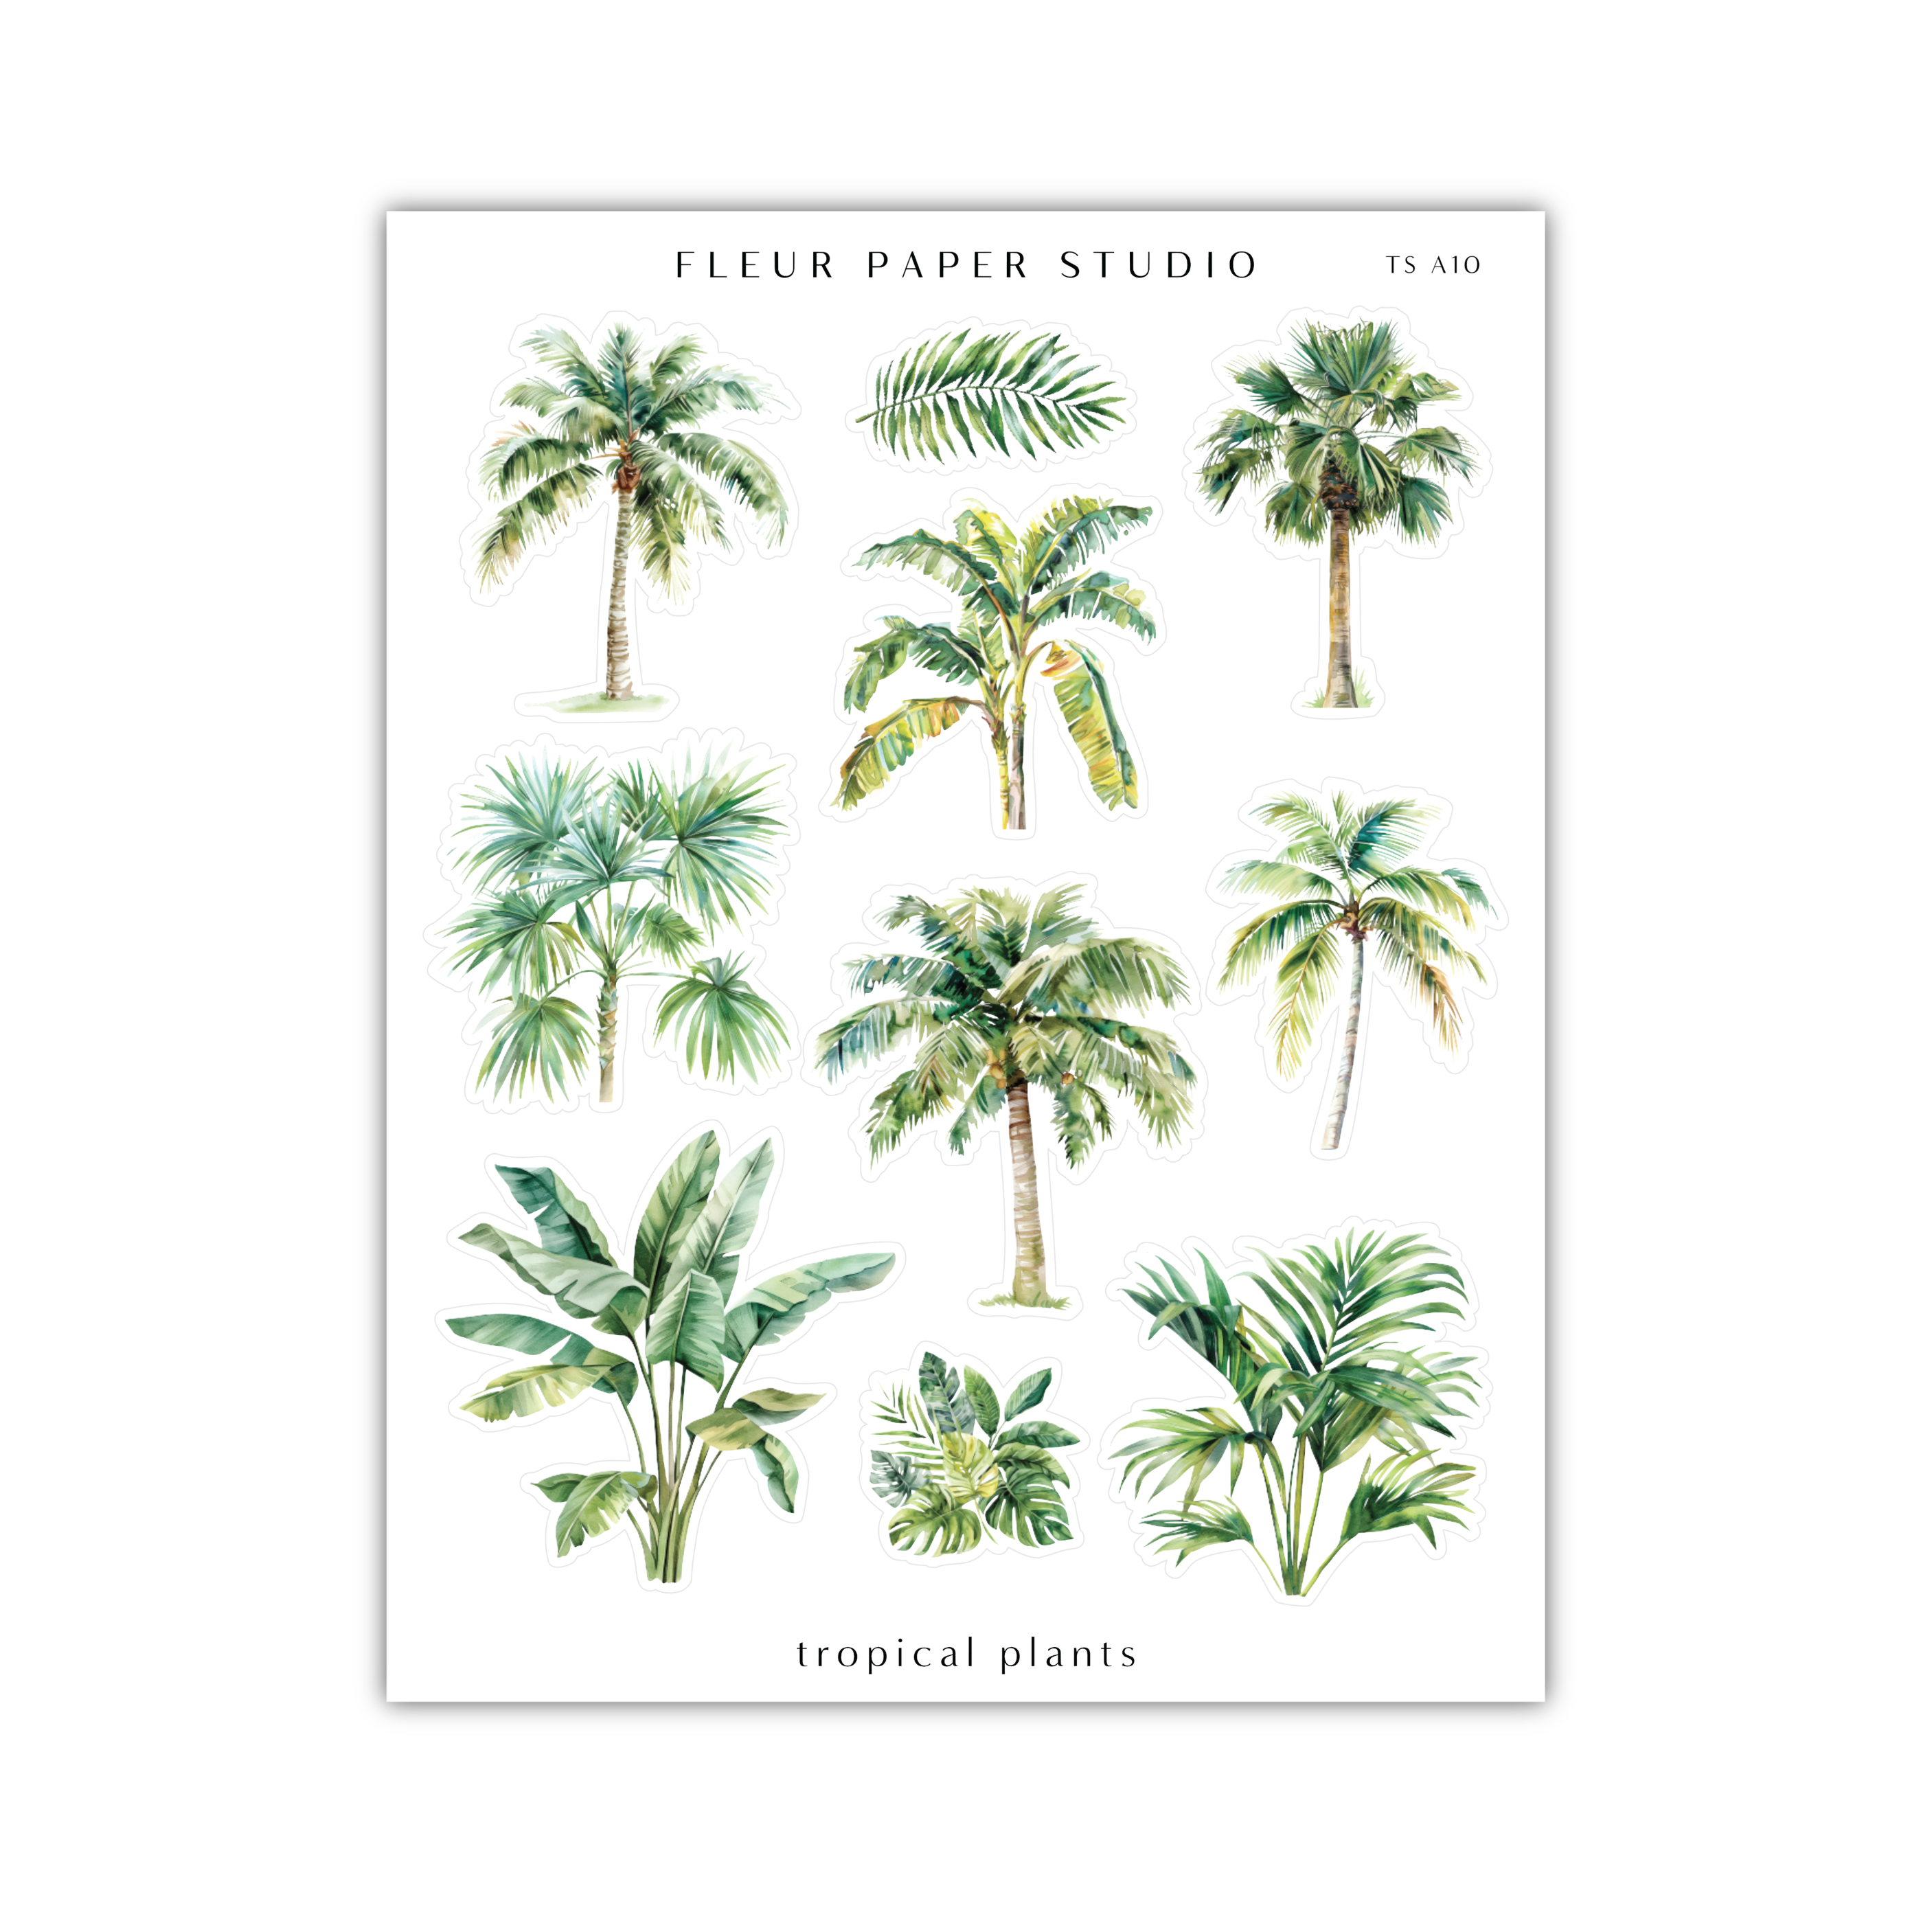 a poster with palm trees and other tropical plants